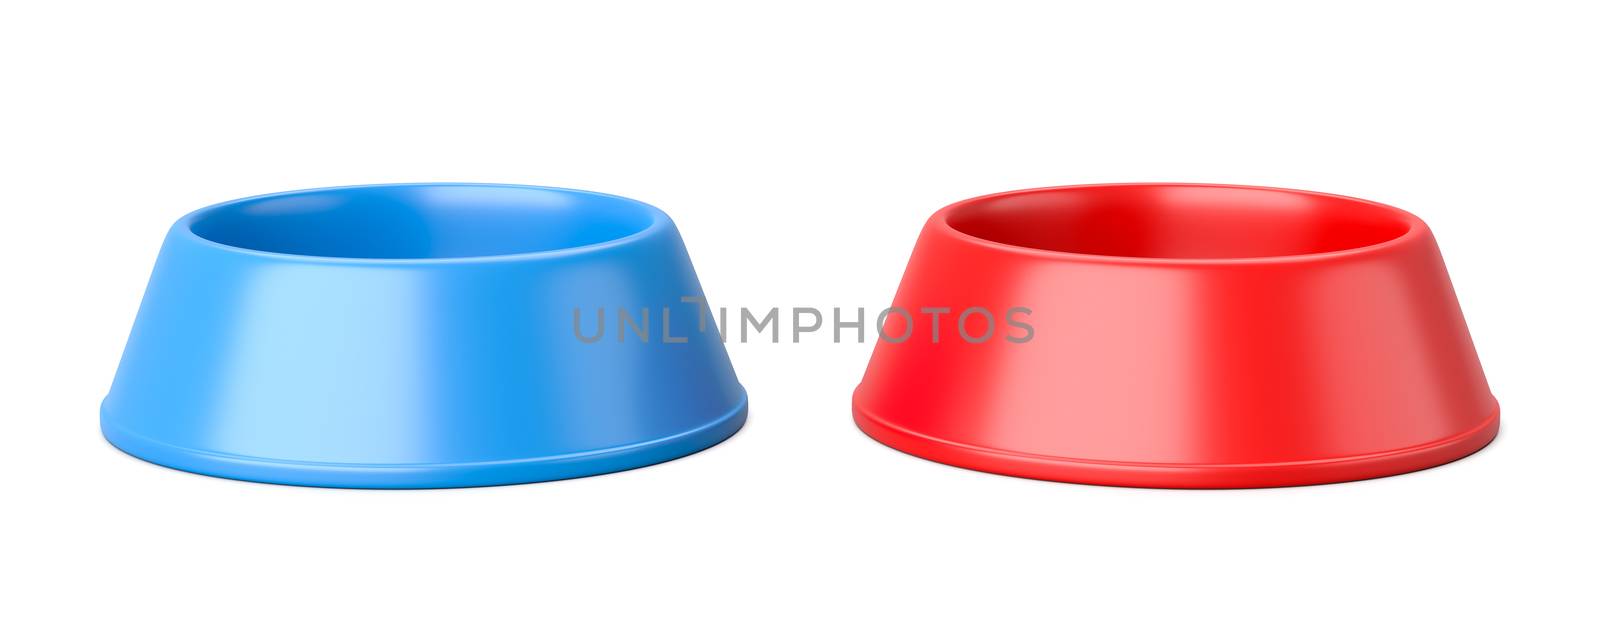 Two Empty Plastic Pets Bowl Isolated on White Background 3D Illustration